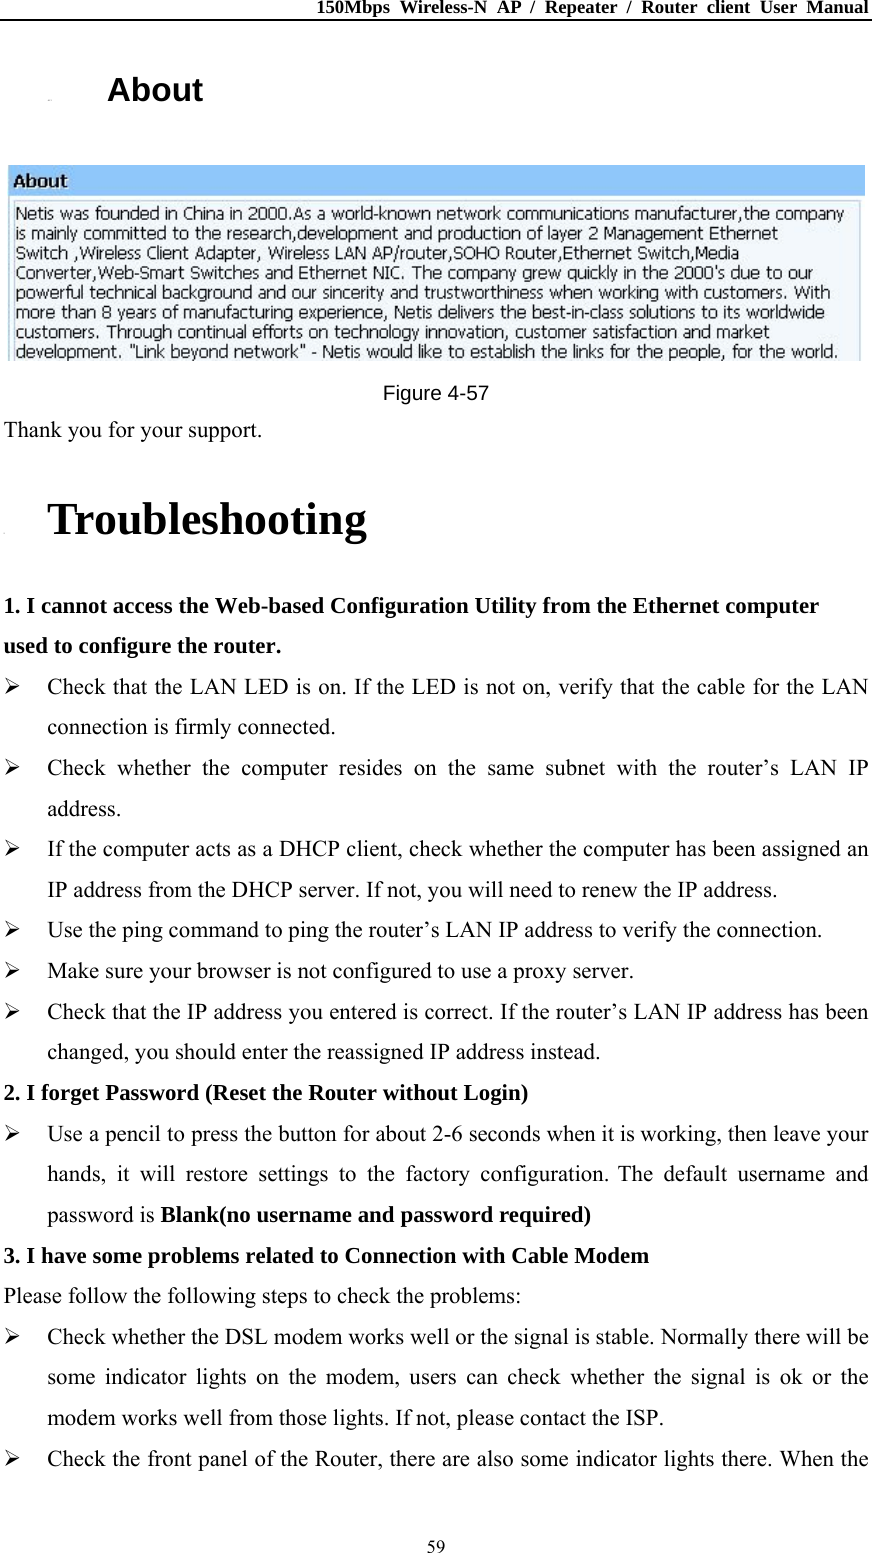 150Mbps Wireless-N AP / Repeater / Router client User Manual  594.13. About  Figure 4-57 Thank you for your support. 5. Troubleshooting 1. I cannot access the Web-based Configuration Utility from the Ethernet computer used to configure the router.  Check that the LAN LED is on. If the LED is not on, verify that the cable for the LAN connection is firmly connected.  Check whether the computer resides on the same subnet with the router’s LAN IP address.  If the computer acts as a DHCP client, check whether the computer has been assigned an IP address from the DHCP server. If not, you will need to renew the IP address.    Use the ping command to ping the router’s LAN IP address to verify the connection.  Make sure your browser is not configured to use a proxy server.  Check that the IP address you entered is correct. If the router’s LAN IP address has been changed, you should enter the reassigned IP address instead. 2. I forget Password (Reset the Router without Login)  Use a pencil to press the button for about 2-6 seconds when it is working, then leave your hands, it will restore settings to the factory configuration. The default username and password is Blank(no username and password required) 3. I have some problems related to Connection with Cable Modem Please follow the following steps to check the problems:  Check whether the DSL modem works well or the signal is stable. Normally there will be some indicator lights on the modem, users can check whether the signal is ok or the modem works well from those lights. If not, please contact the ISP.  Check the front panel of the Router, there are also some indicator lights there. When the 